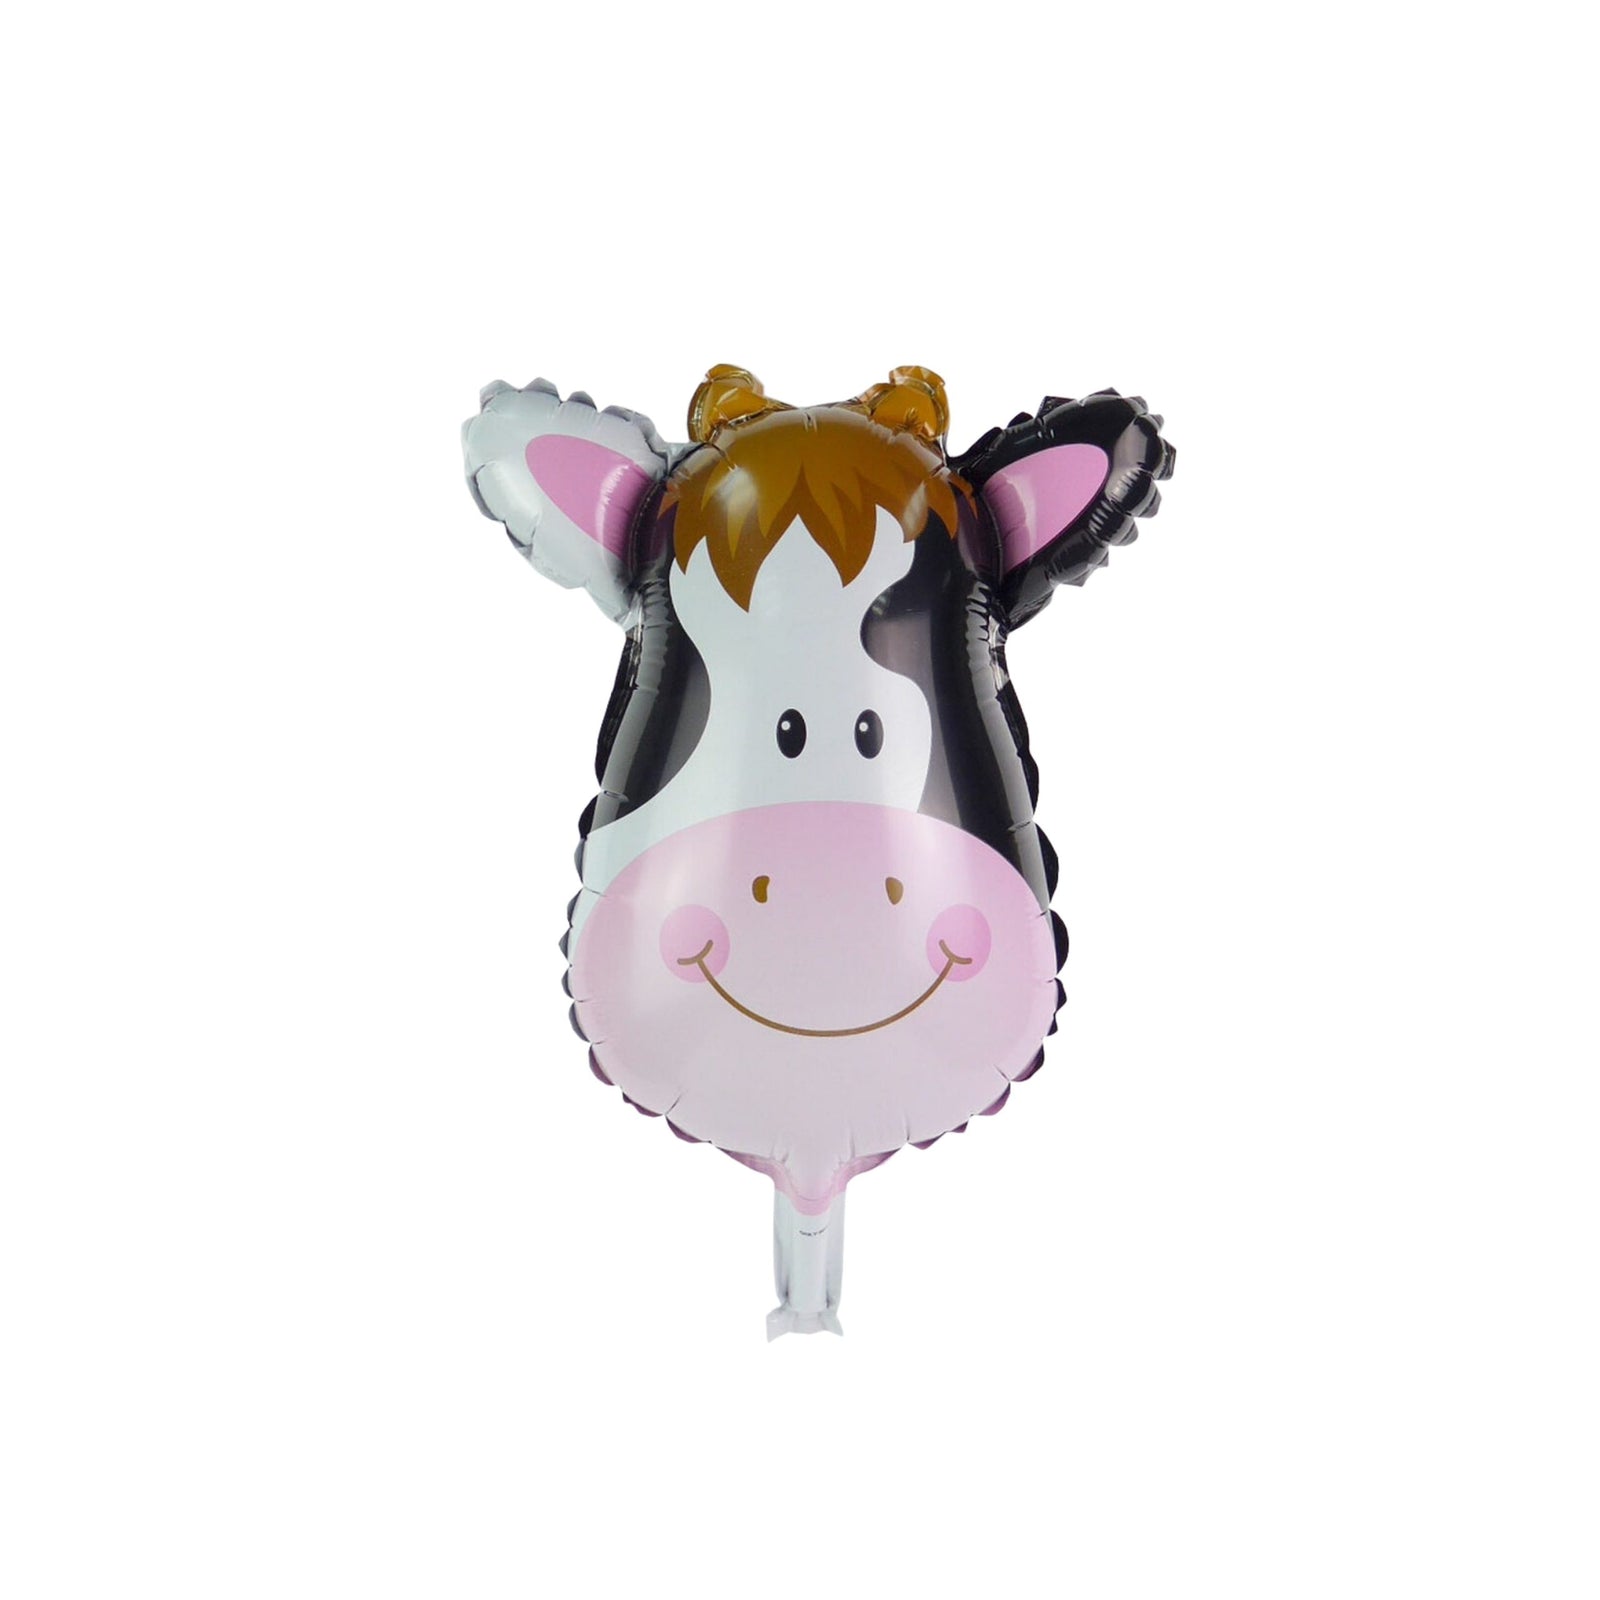 Animal Face Shaped Foil Balloon for Kids Birthday Party, Animal Theme, Zoo Party Decoration- Pack of 1 (Cow)